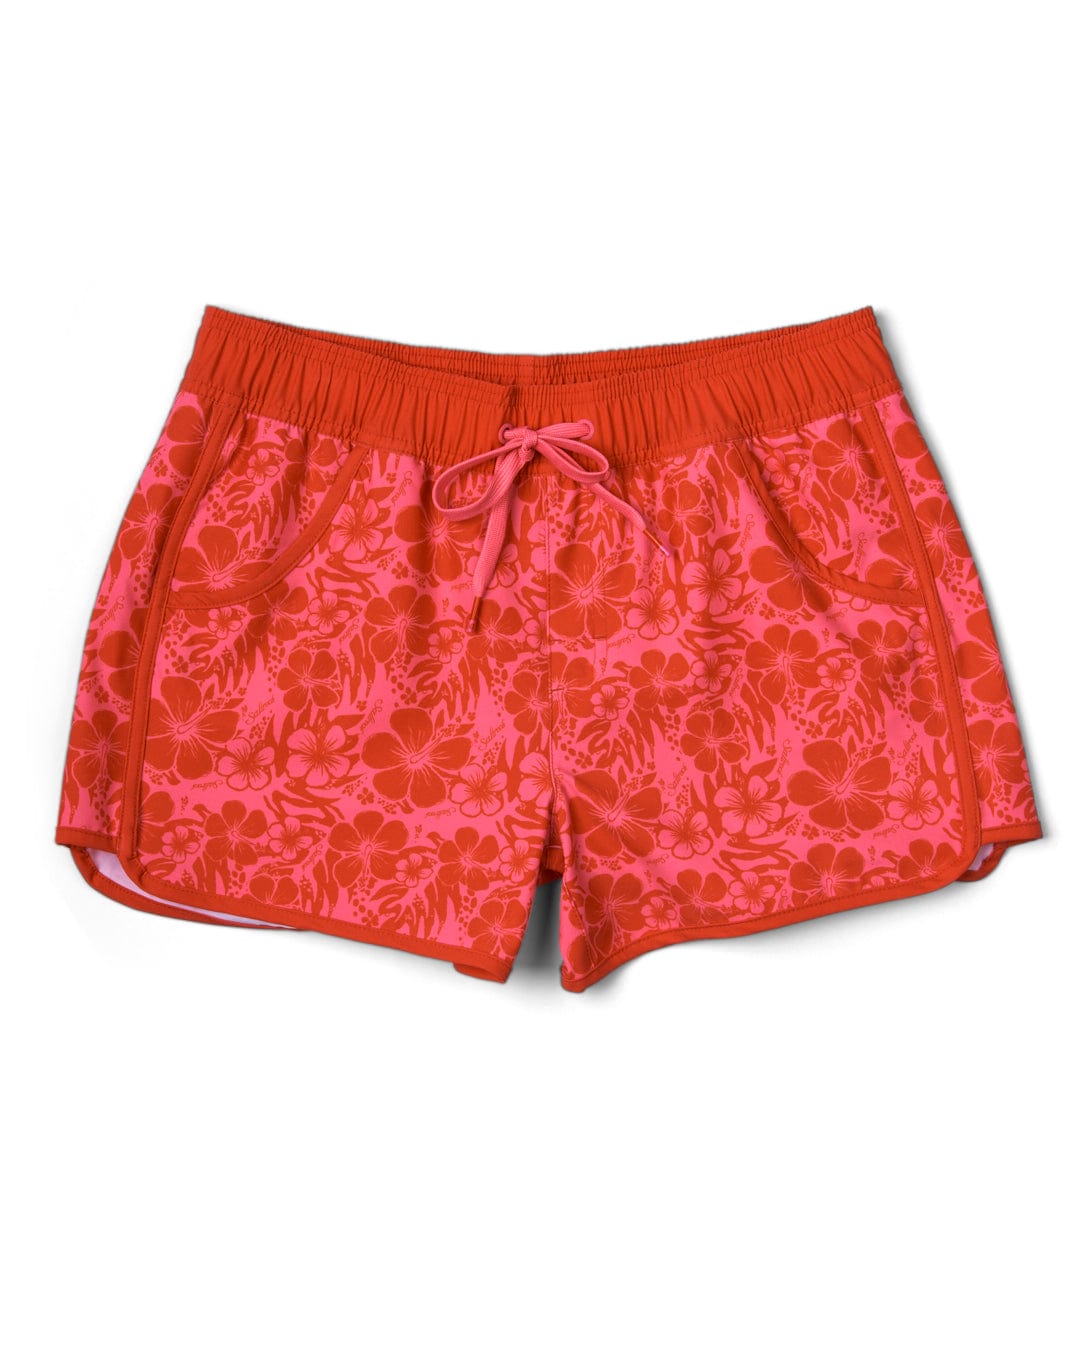 These Saltrock Hibiscus women's boardshorts feature a vibrant red and pink floral print design. Made with Repreve recycled material, they offer 4 way stretch for added comfort.